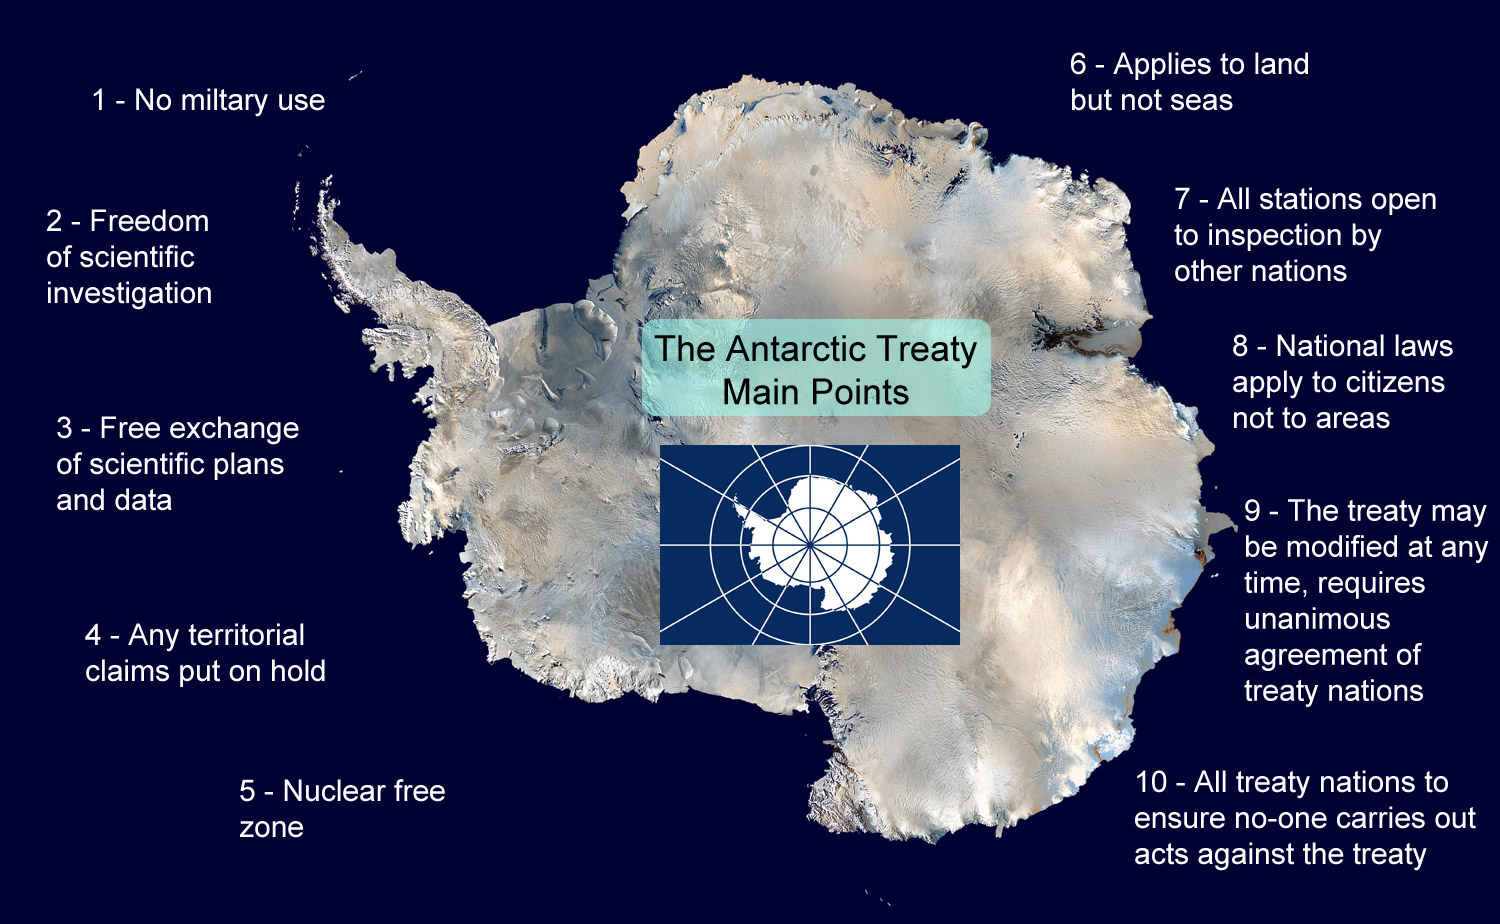 India Champions Antarctica Protection: Urges Global Participation in Treaty to Safeguard the Continent